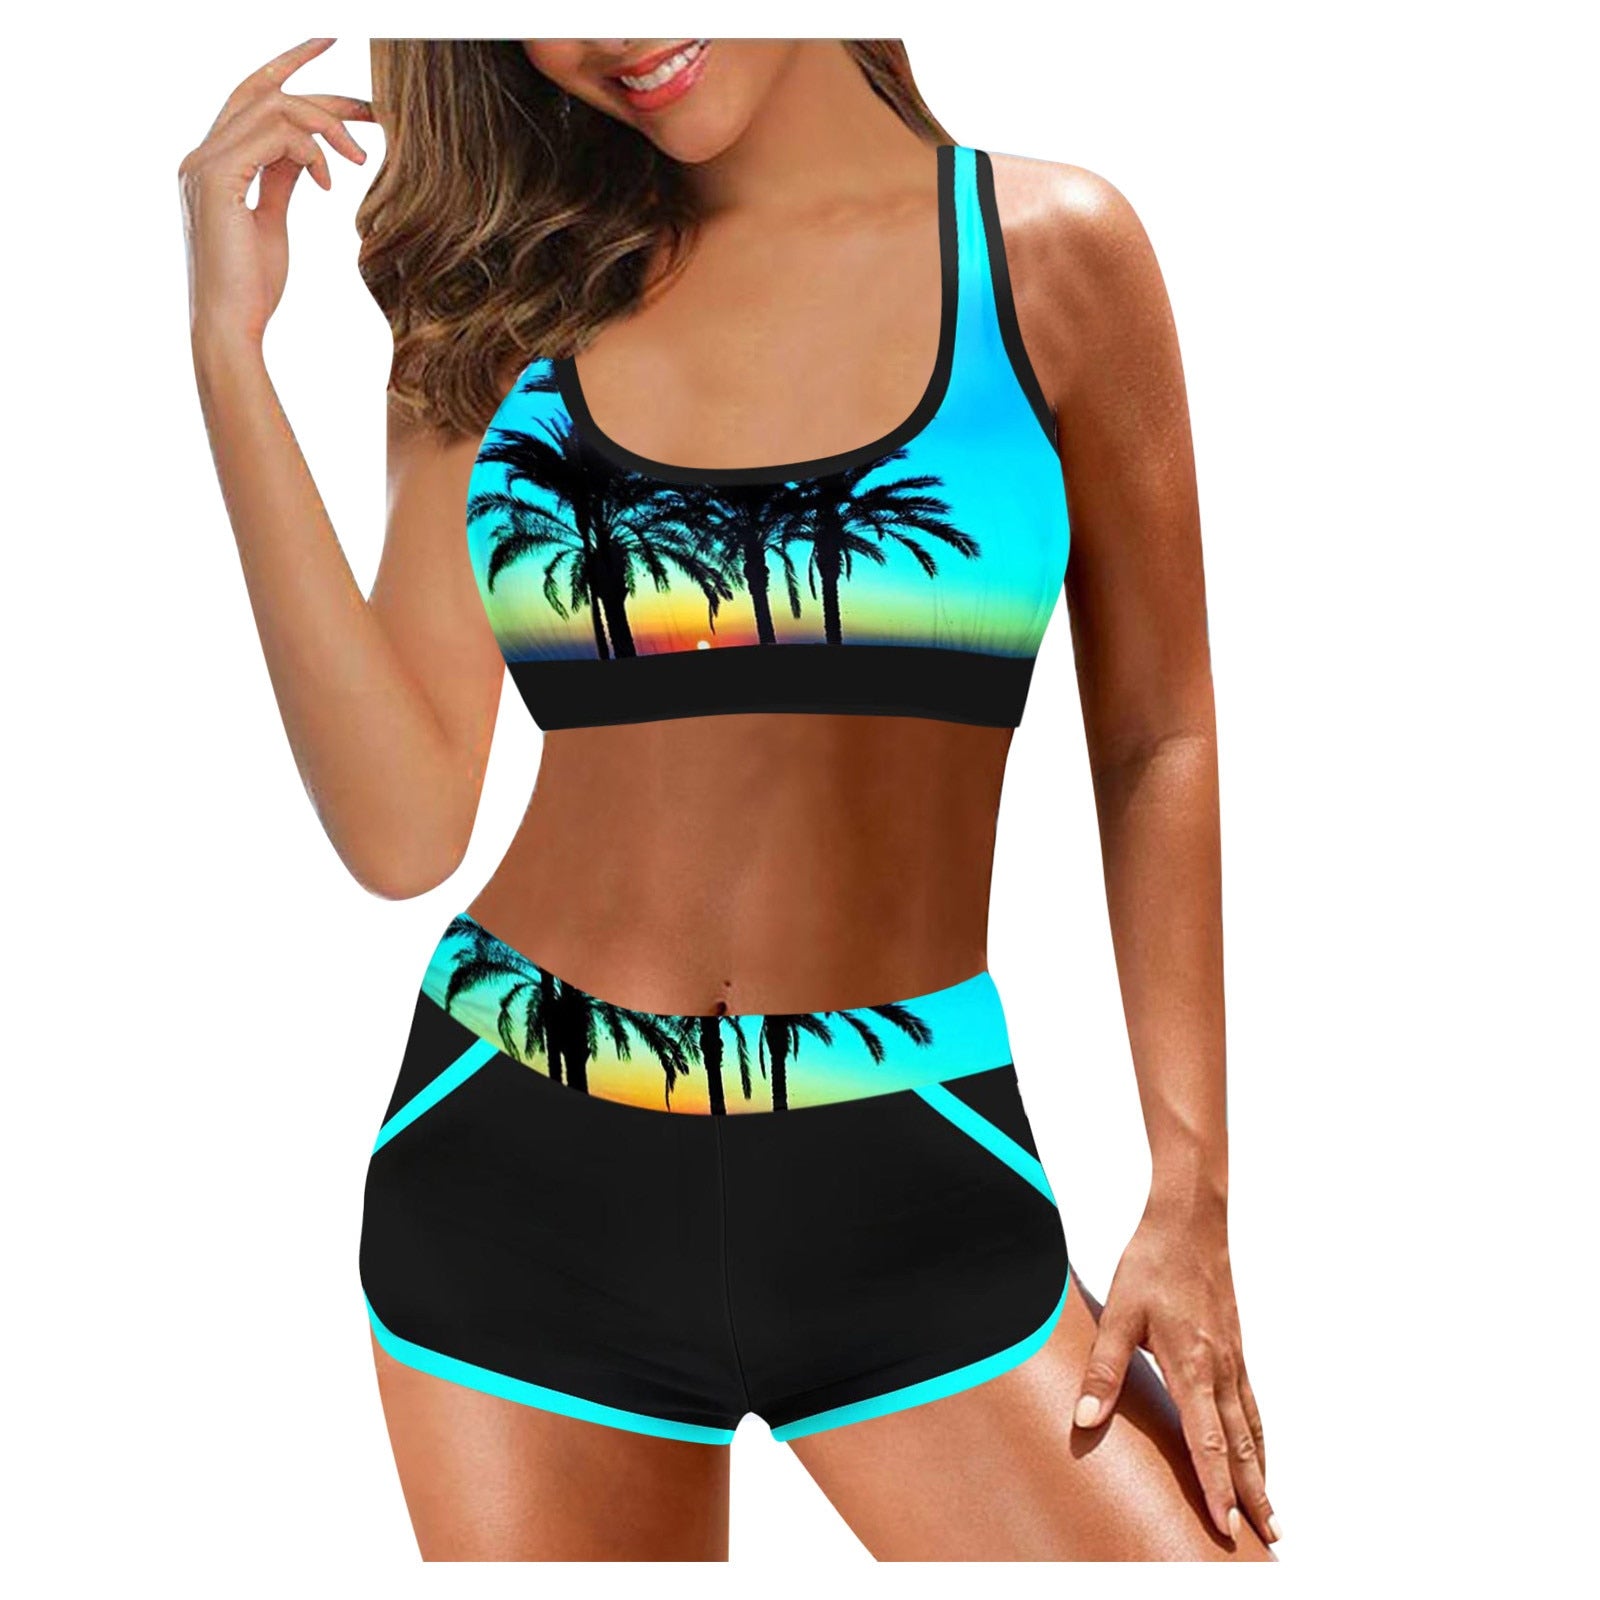 Women's Sexy High Waist Split Print Push Up Bikini Swim Top And Shorts Colors E & F Sizes S-XXL Brought To You By Officially Sexy